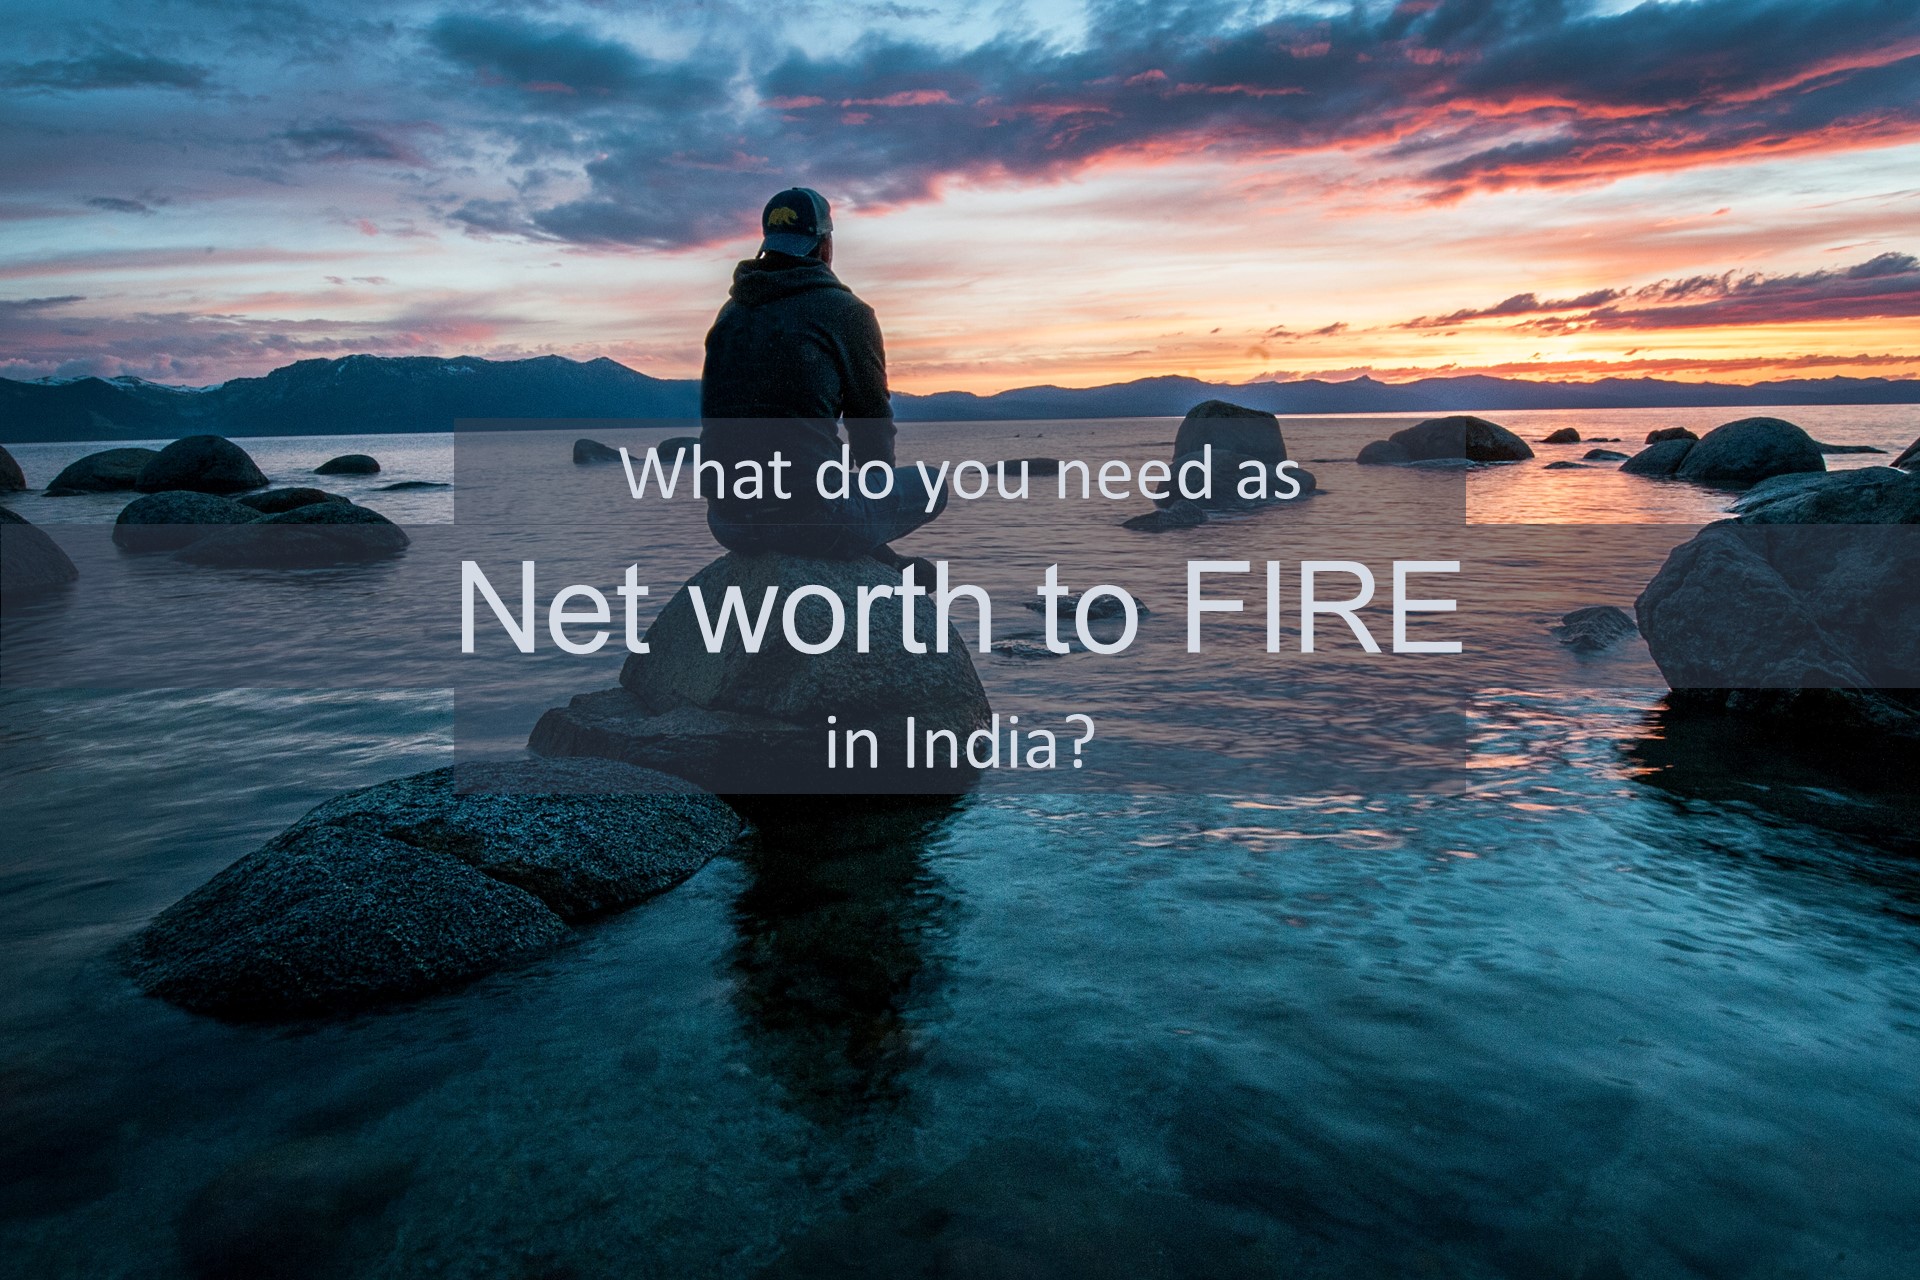 What is the net-worth needed to FIRE in India?